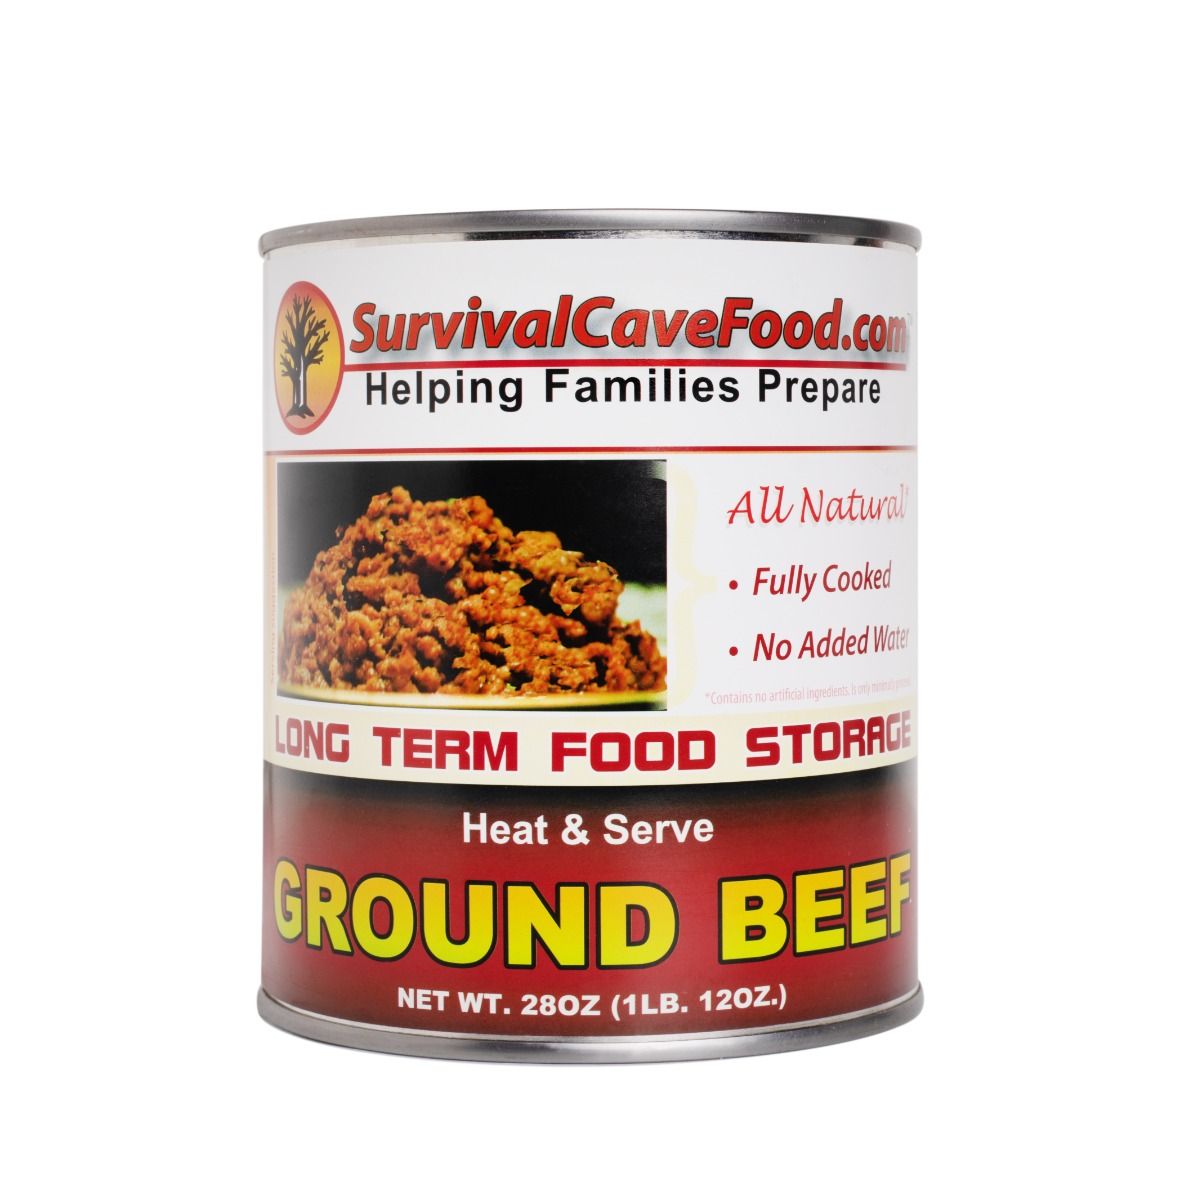 Survival Cave Ground Beef 12 - 28oz canst